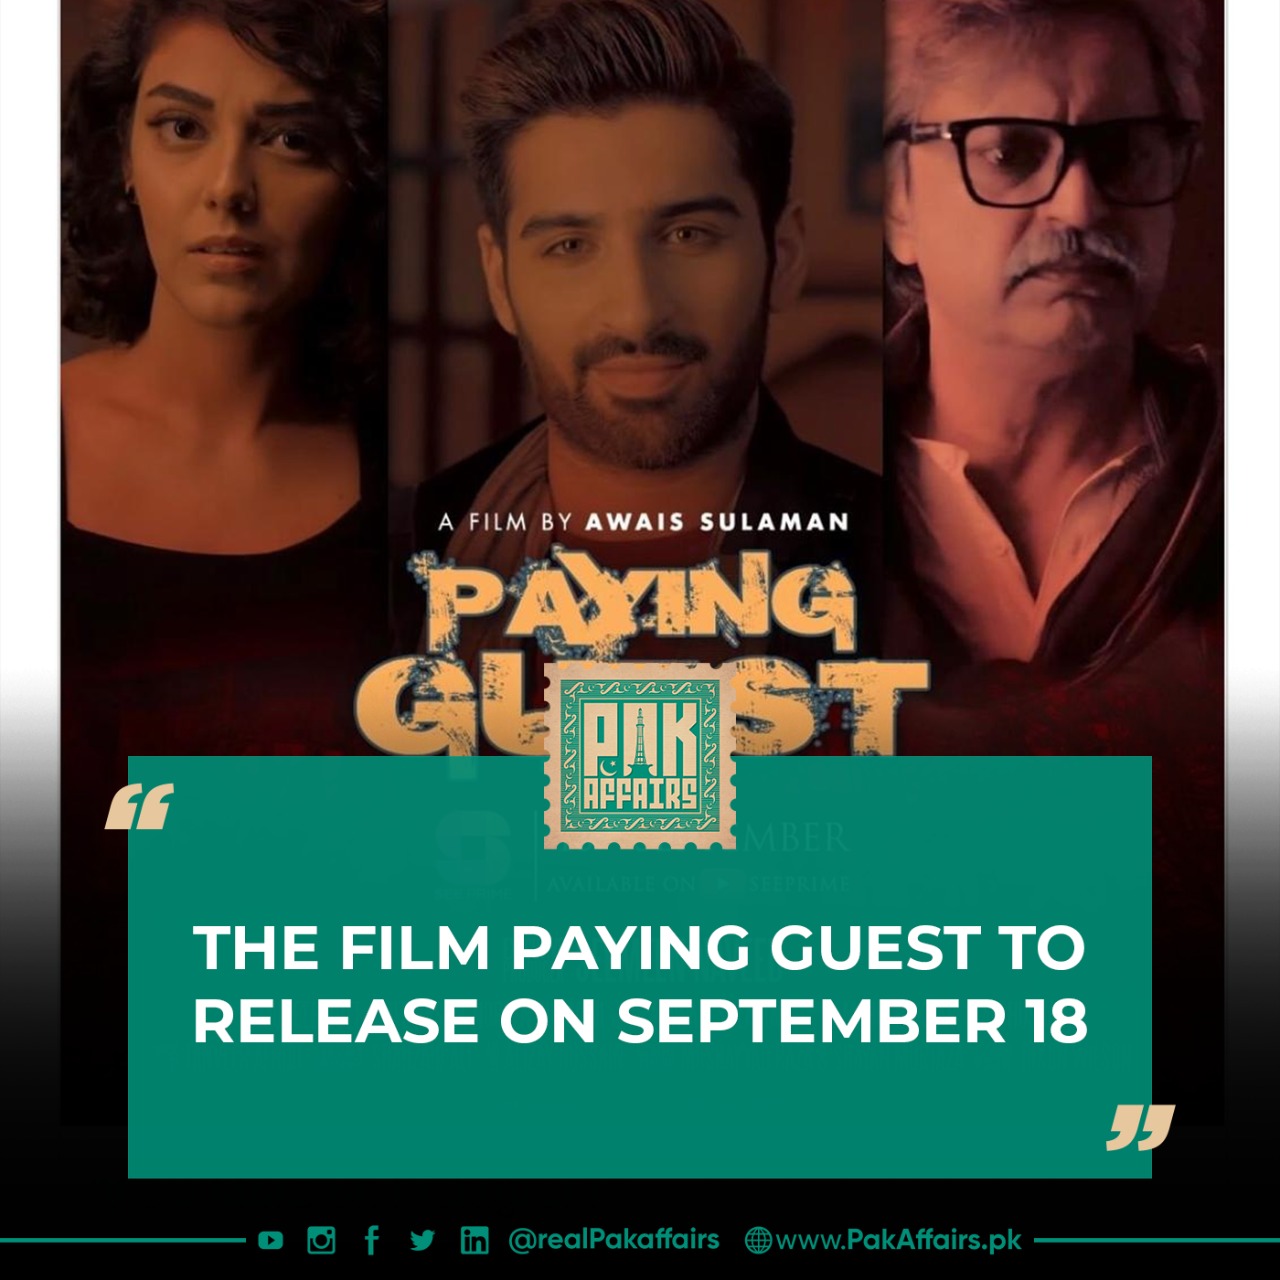 The Film Paying Guest To Release On September 18